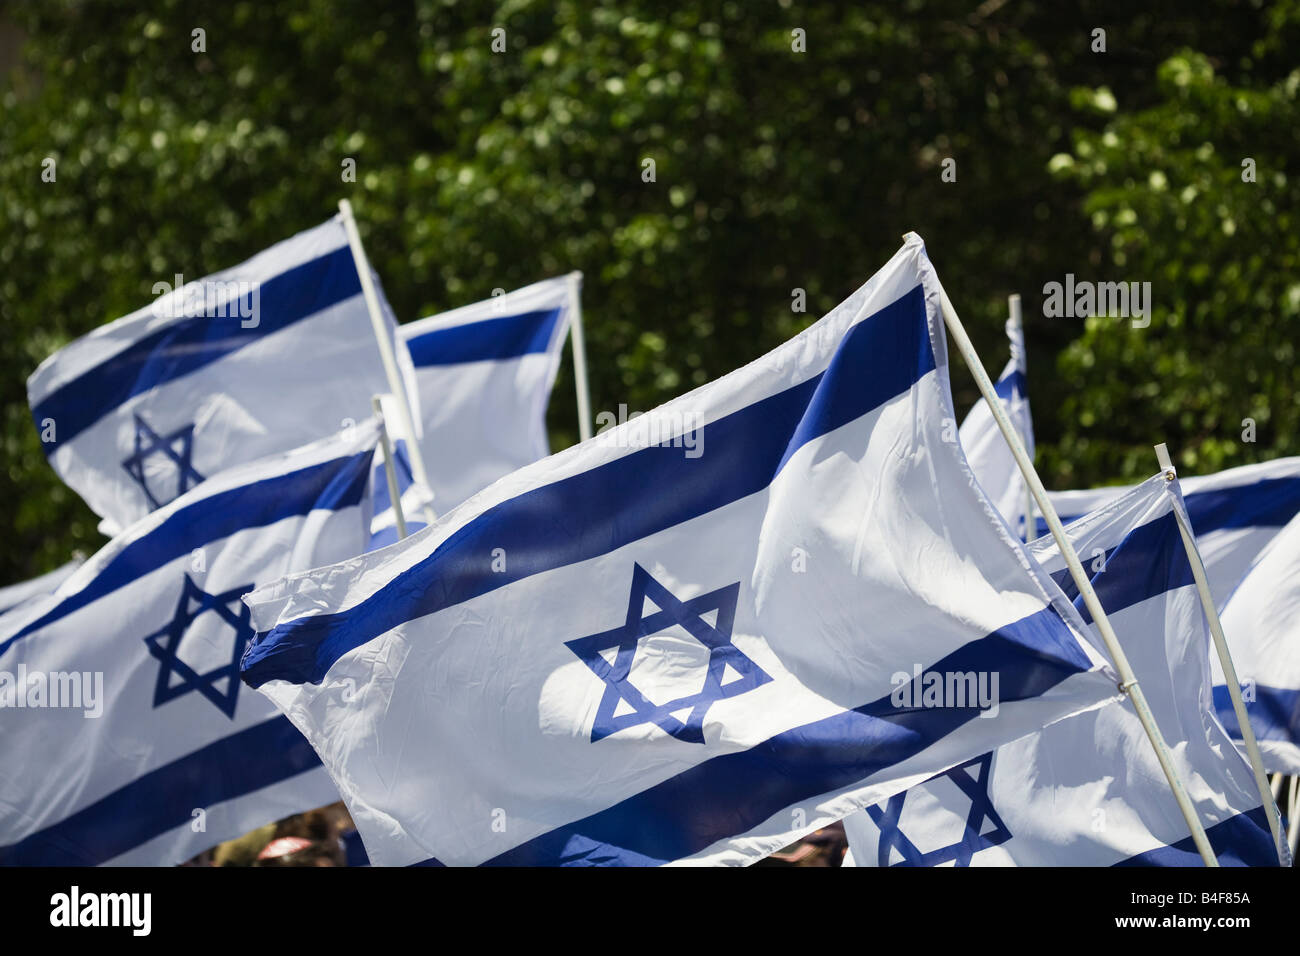 Flags of Isreal during Isreal Day Parade on Fifth Avenue in New York City, New York, USA. Stock Photo